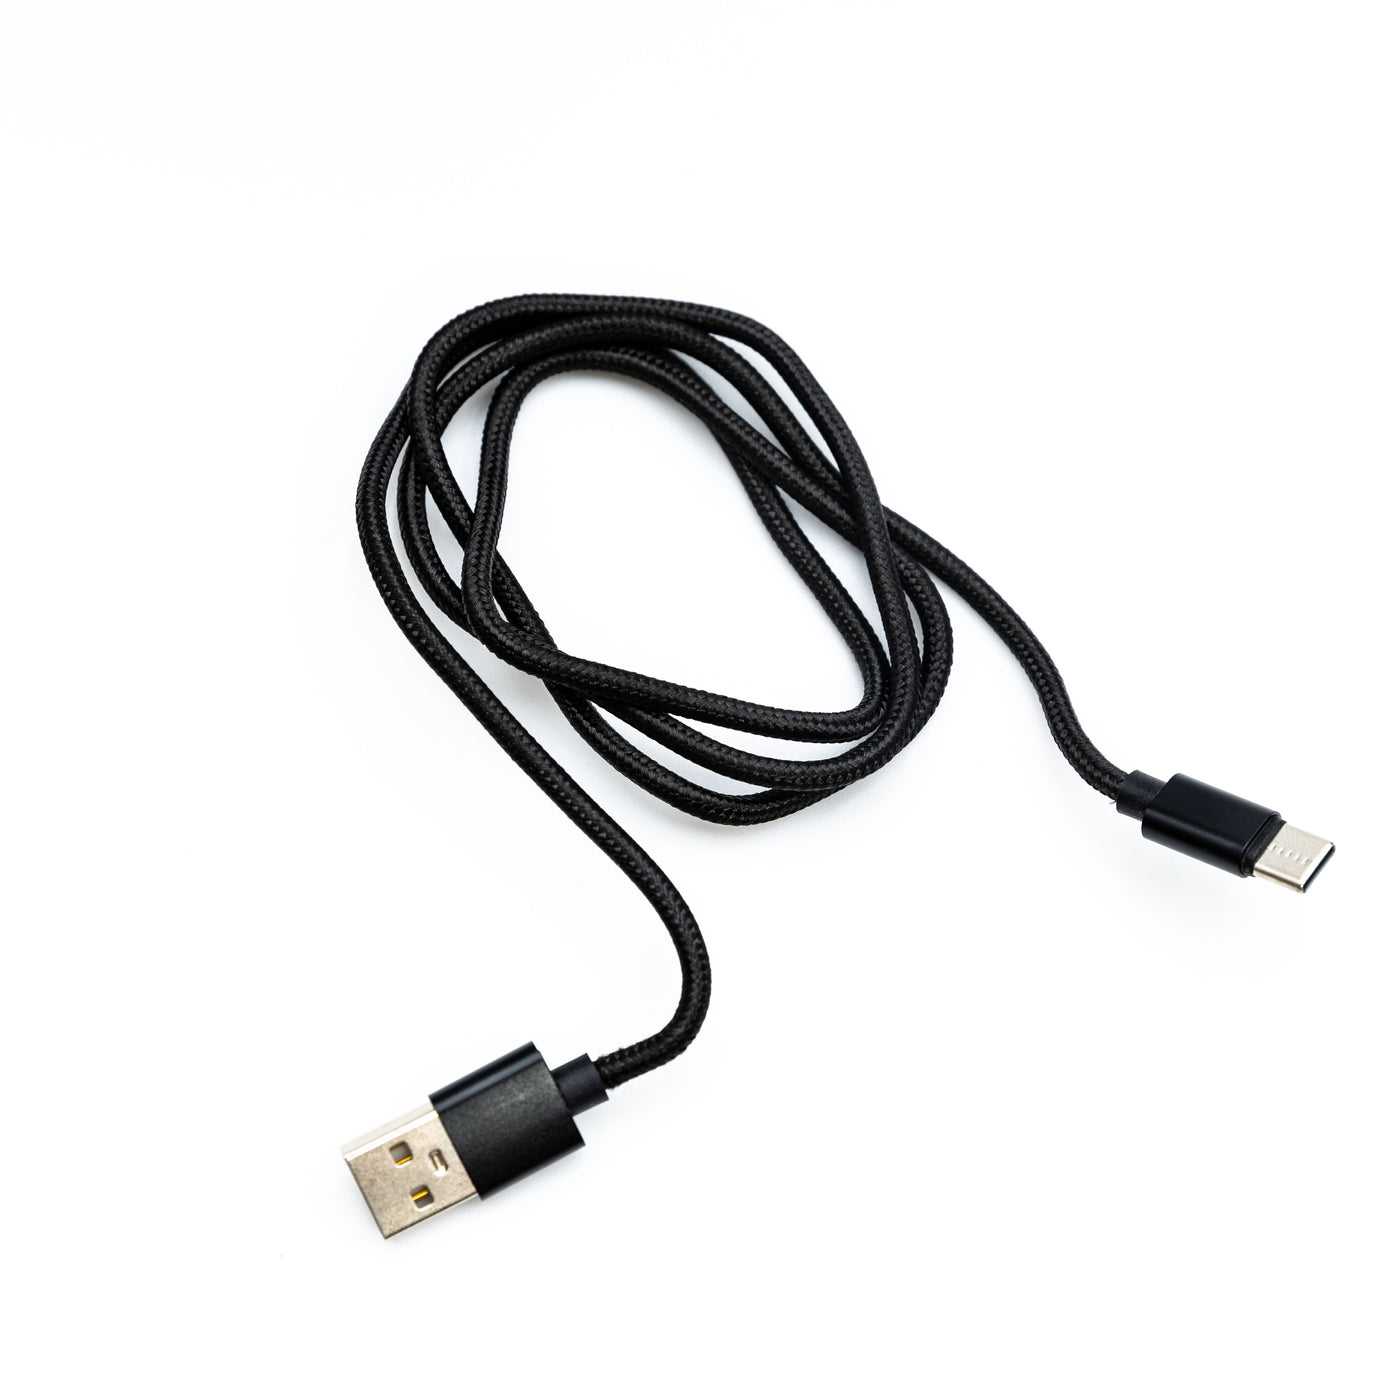 Focus V high quality USB-C charging cable